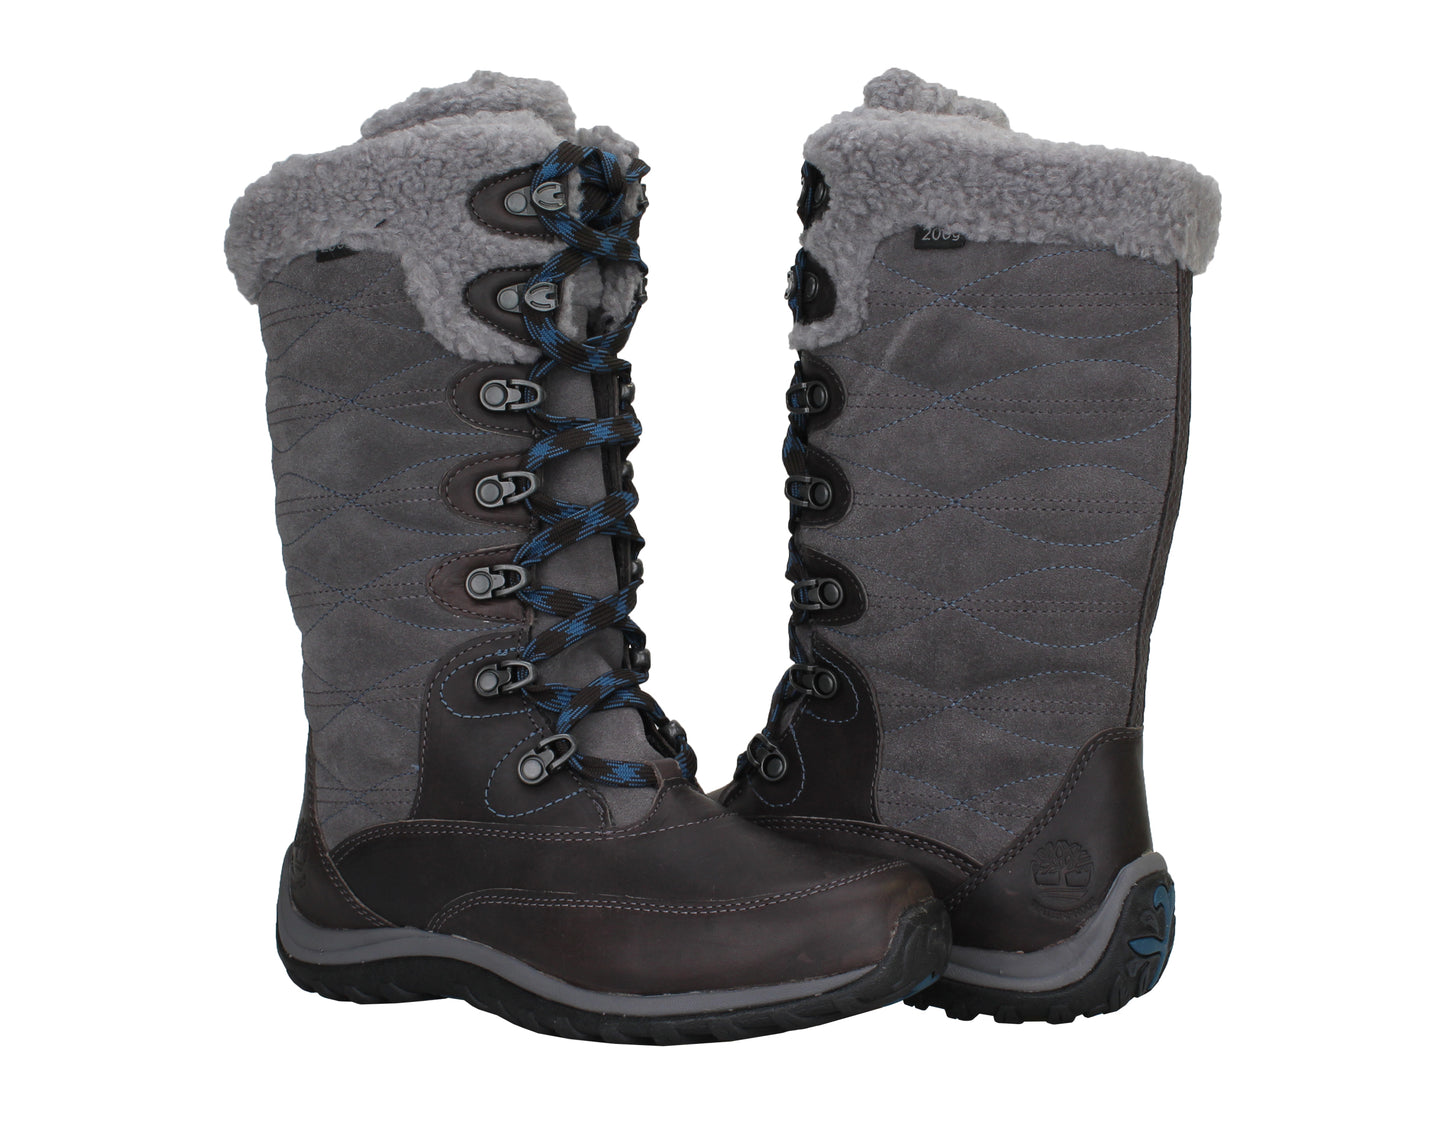 Timberland Earthkeepers Willowood Waterproof Insulated Women's Boots